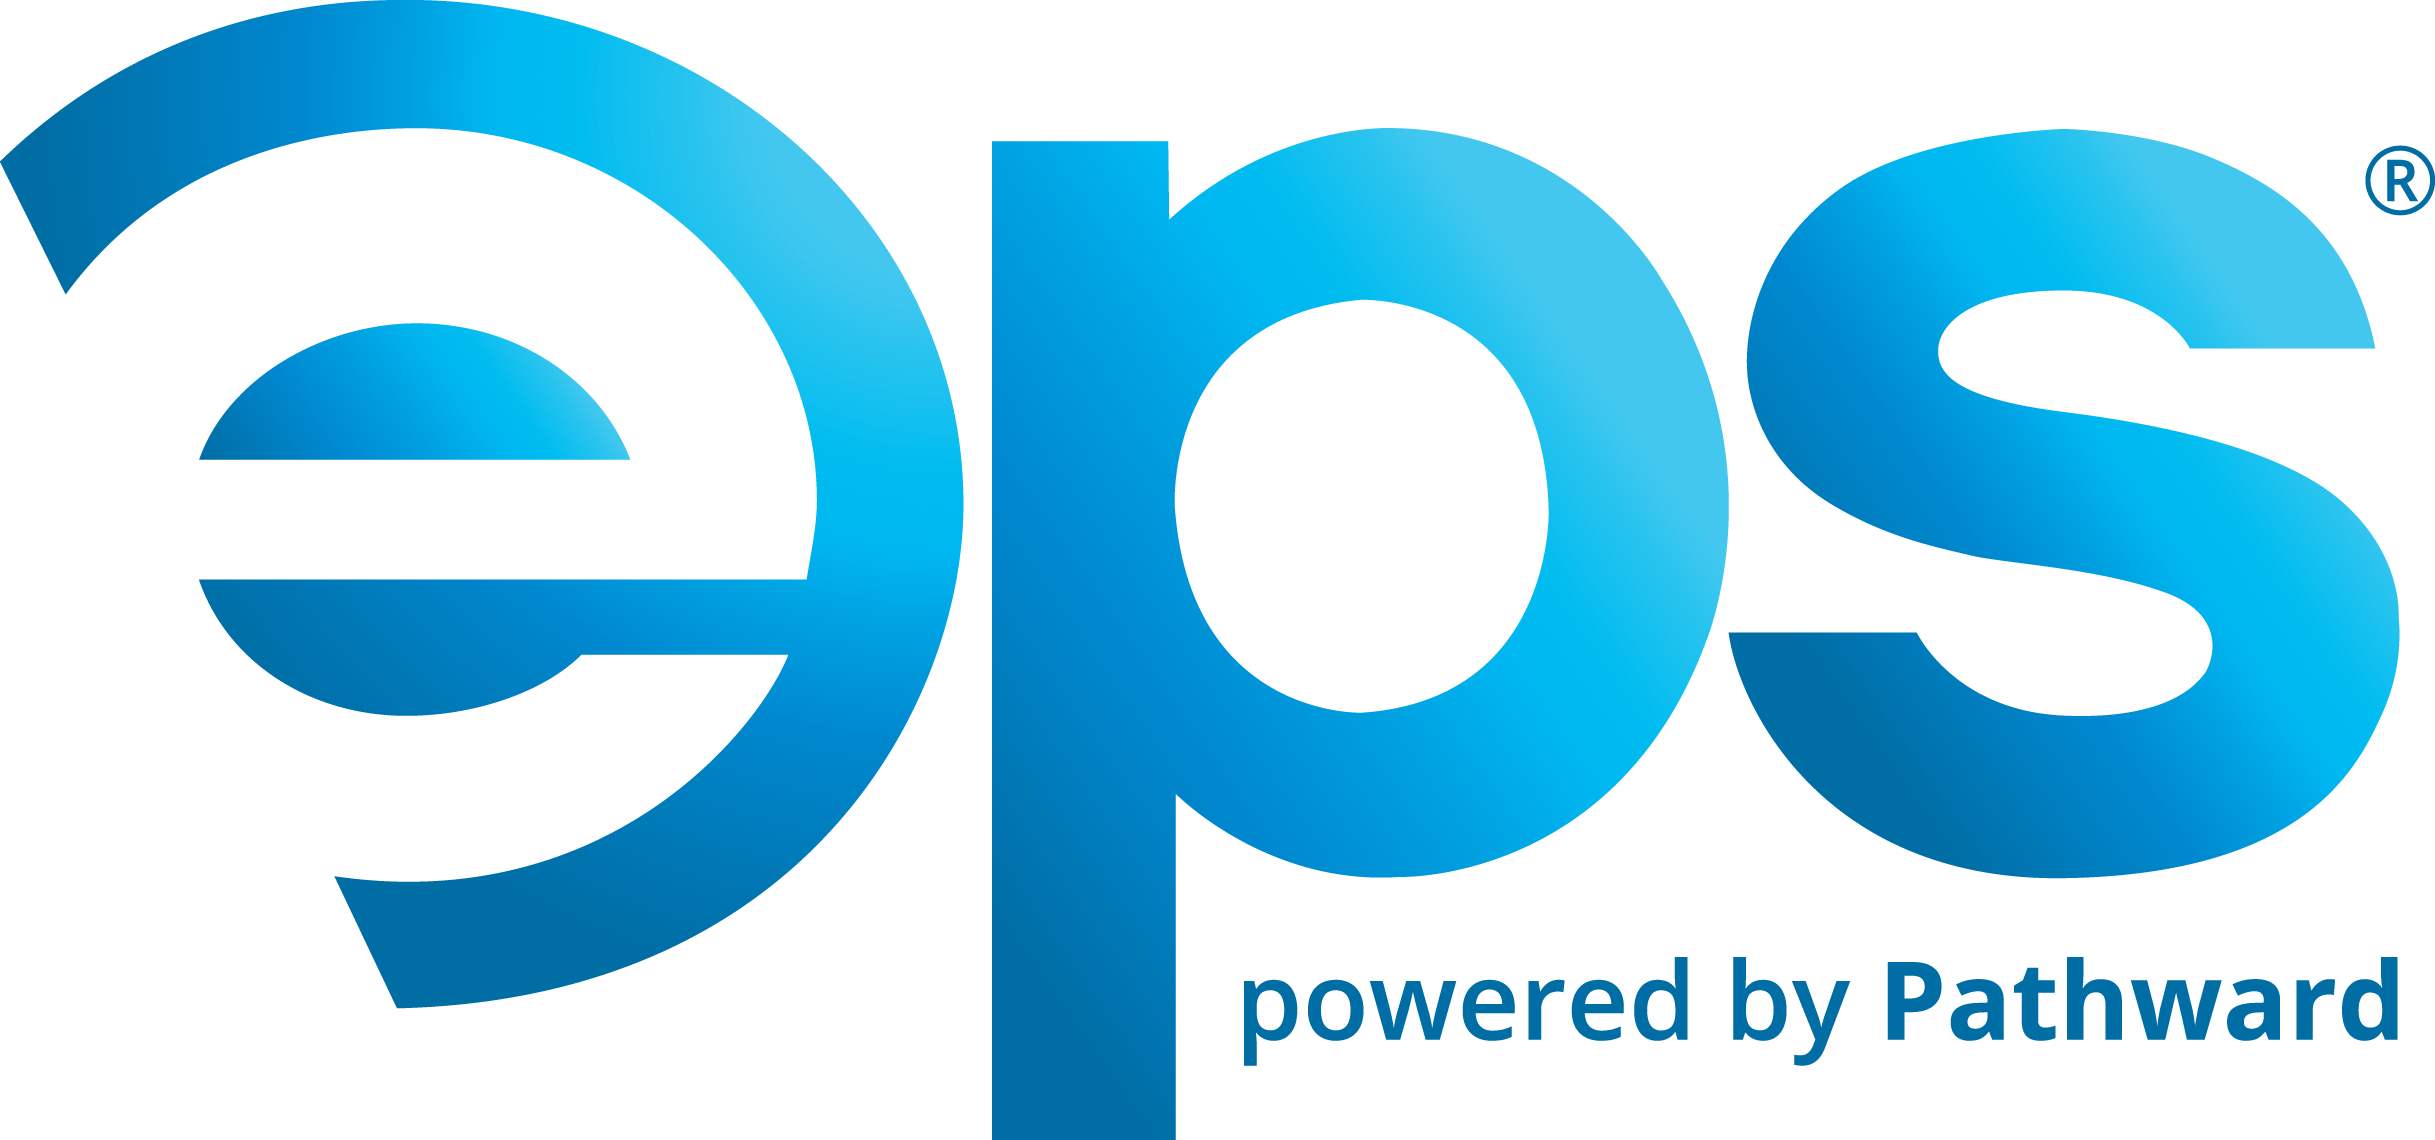 eps a division of metabank logo